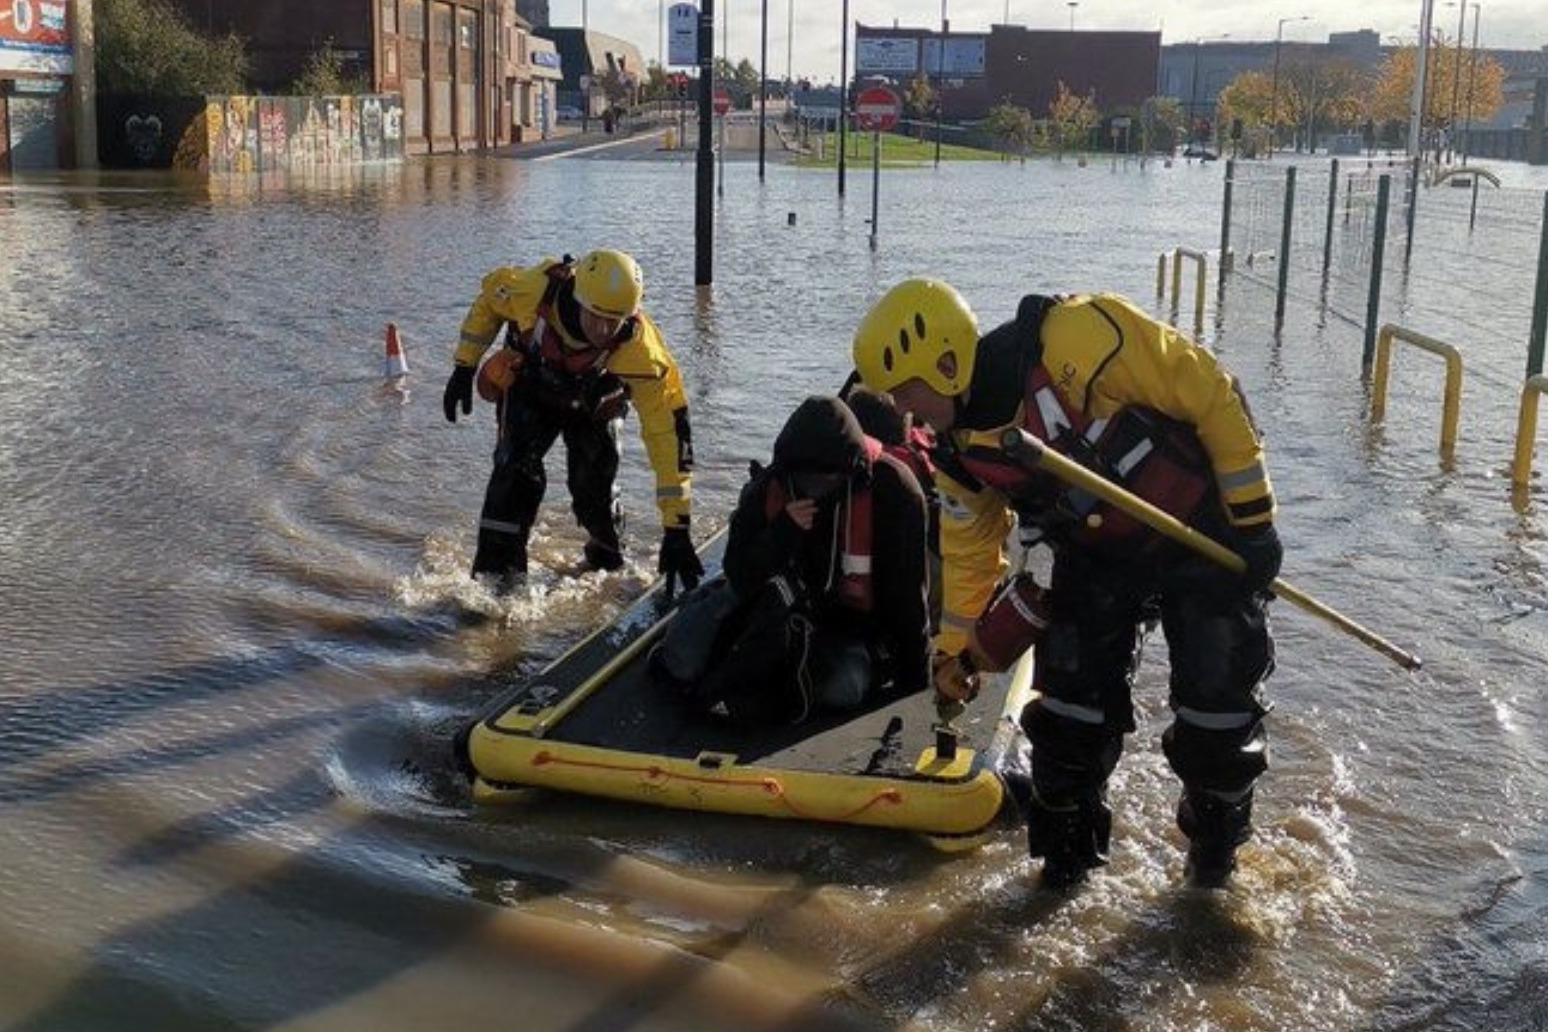 BORIS JOHNSON URGES PEOPLE IN FLOOD HIT AREAS TO HEED EMERGENCY SERVICE ADVICE 